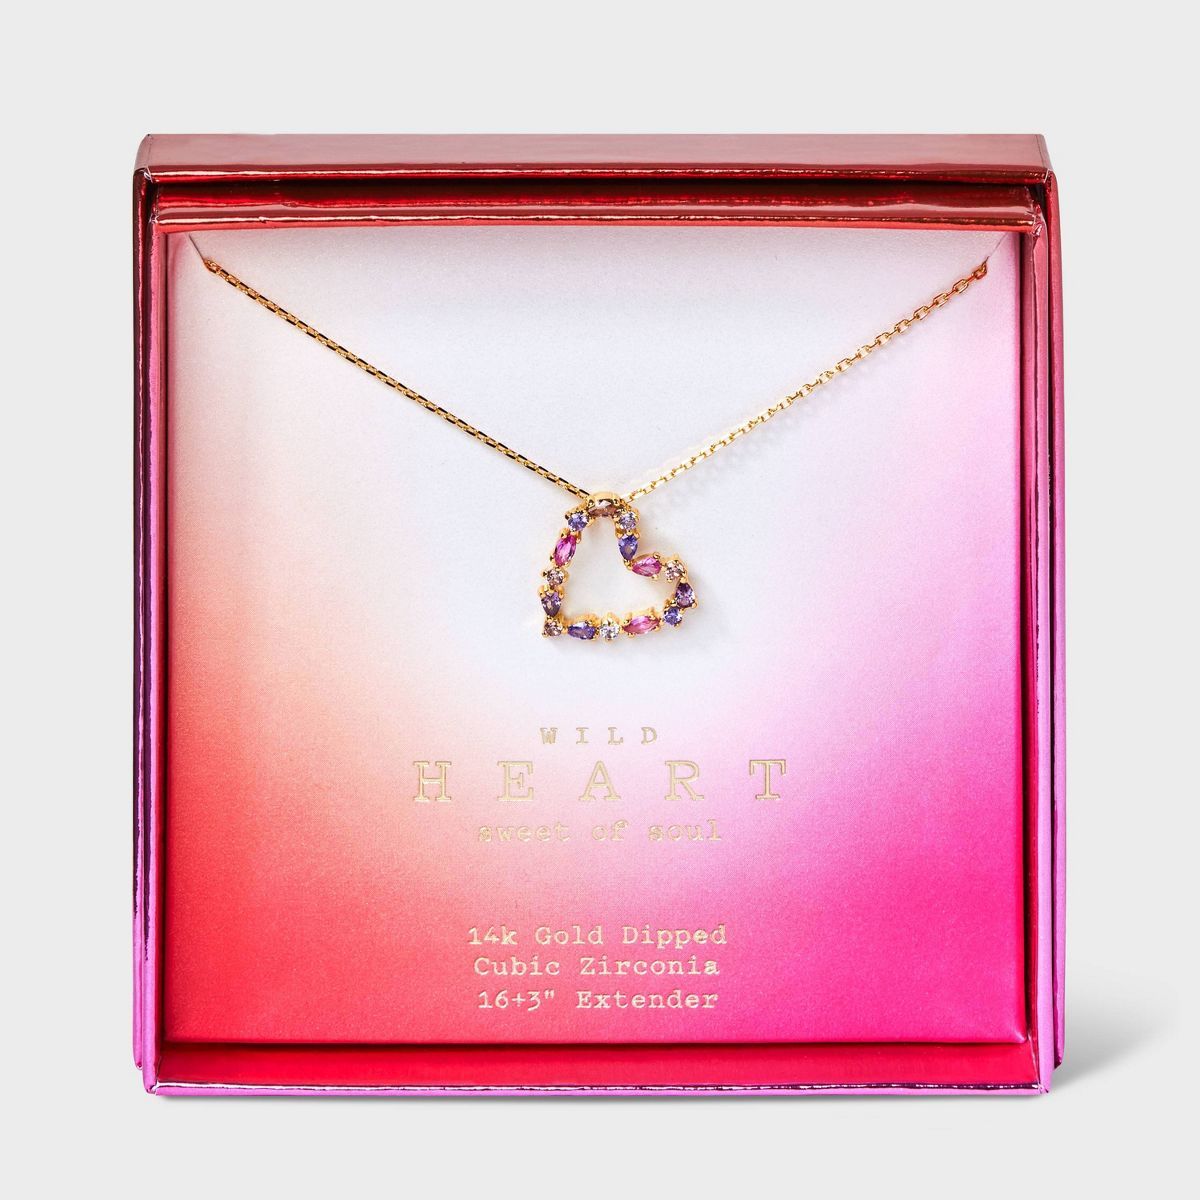 14K Gold Dipped Cubic Zirconia Open Heart Pendant Necklace - A New Day™ Purple/Pink | Target